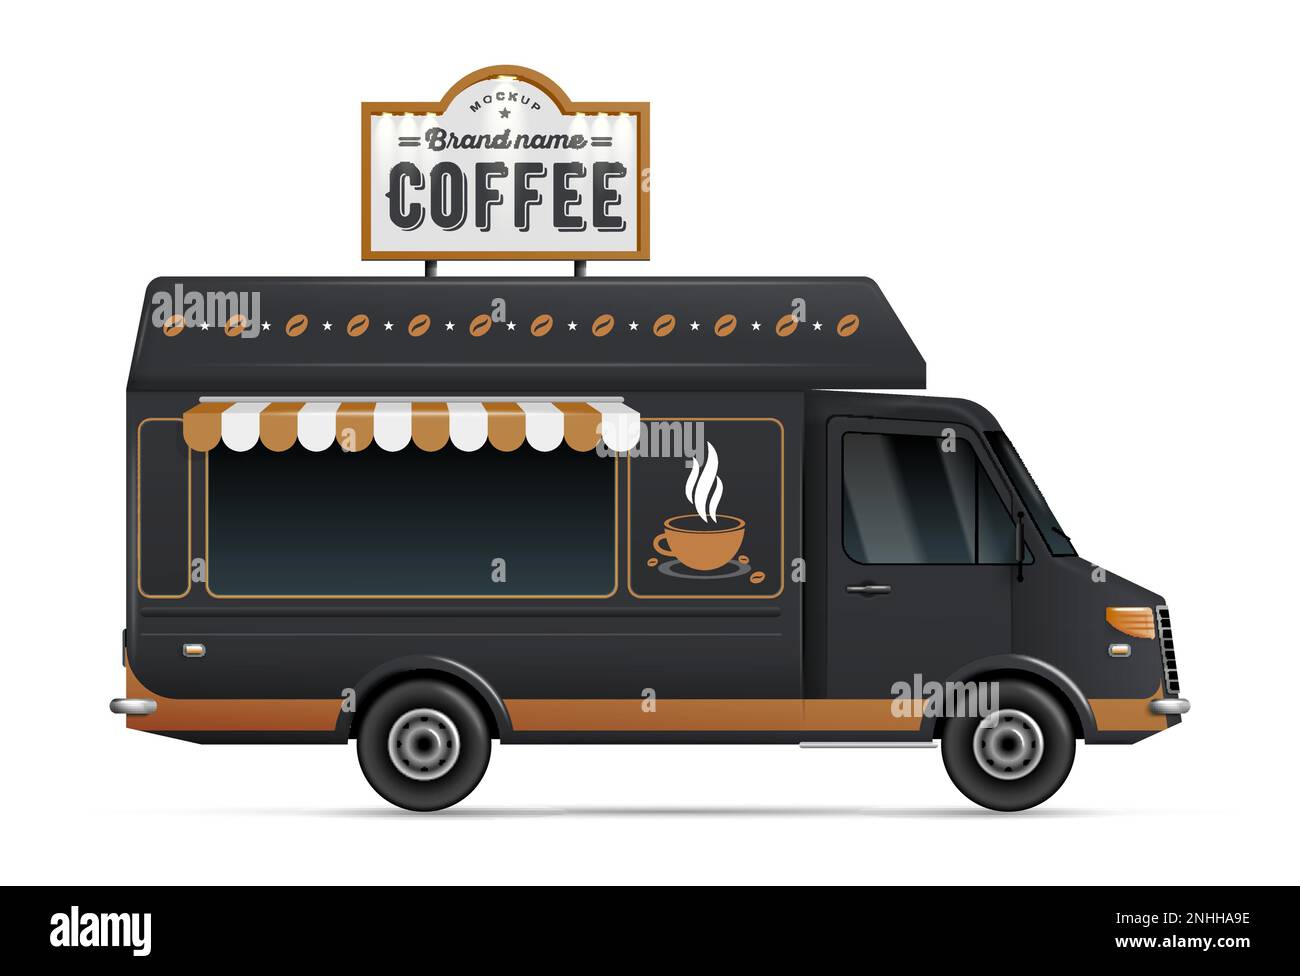 Realistic black coffee shop food truck mockup side view vector illustration Stock Vector